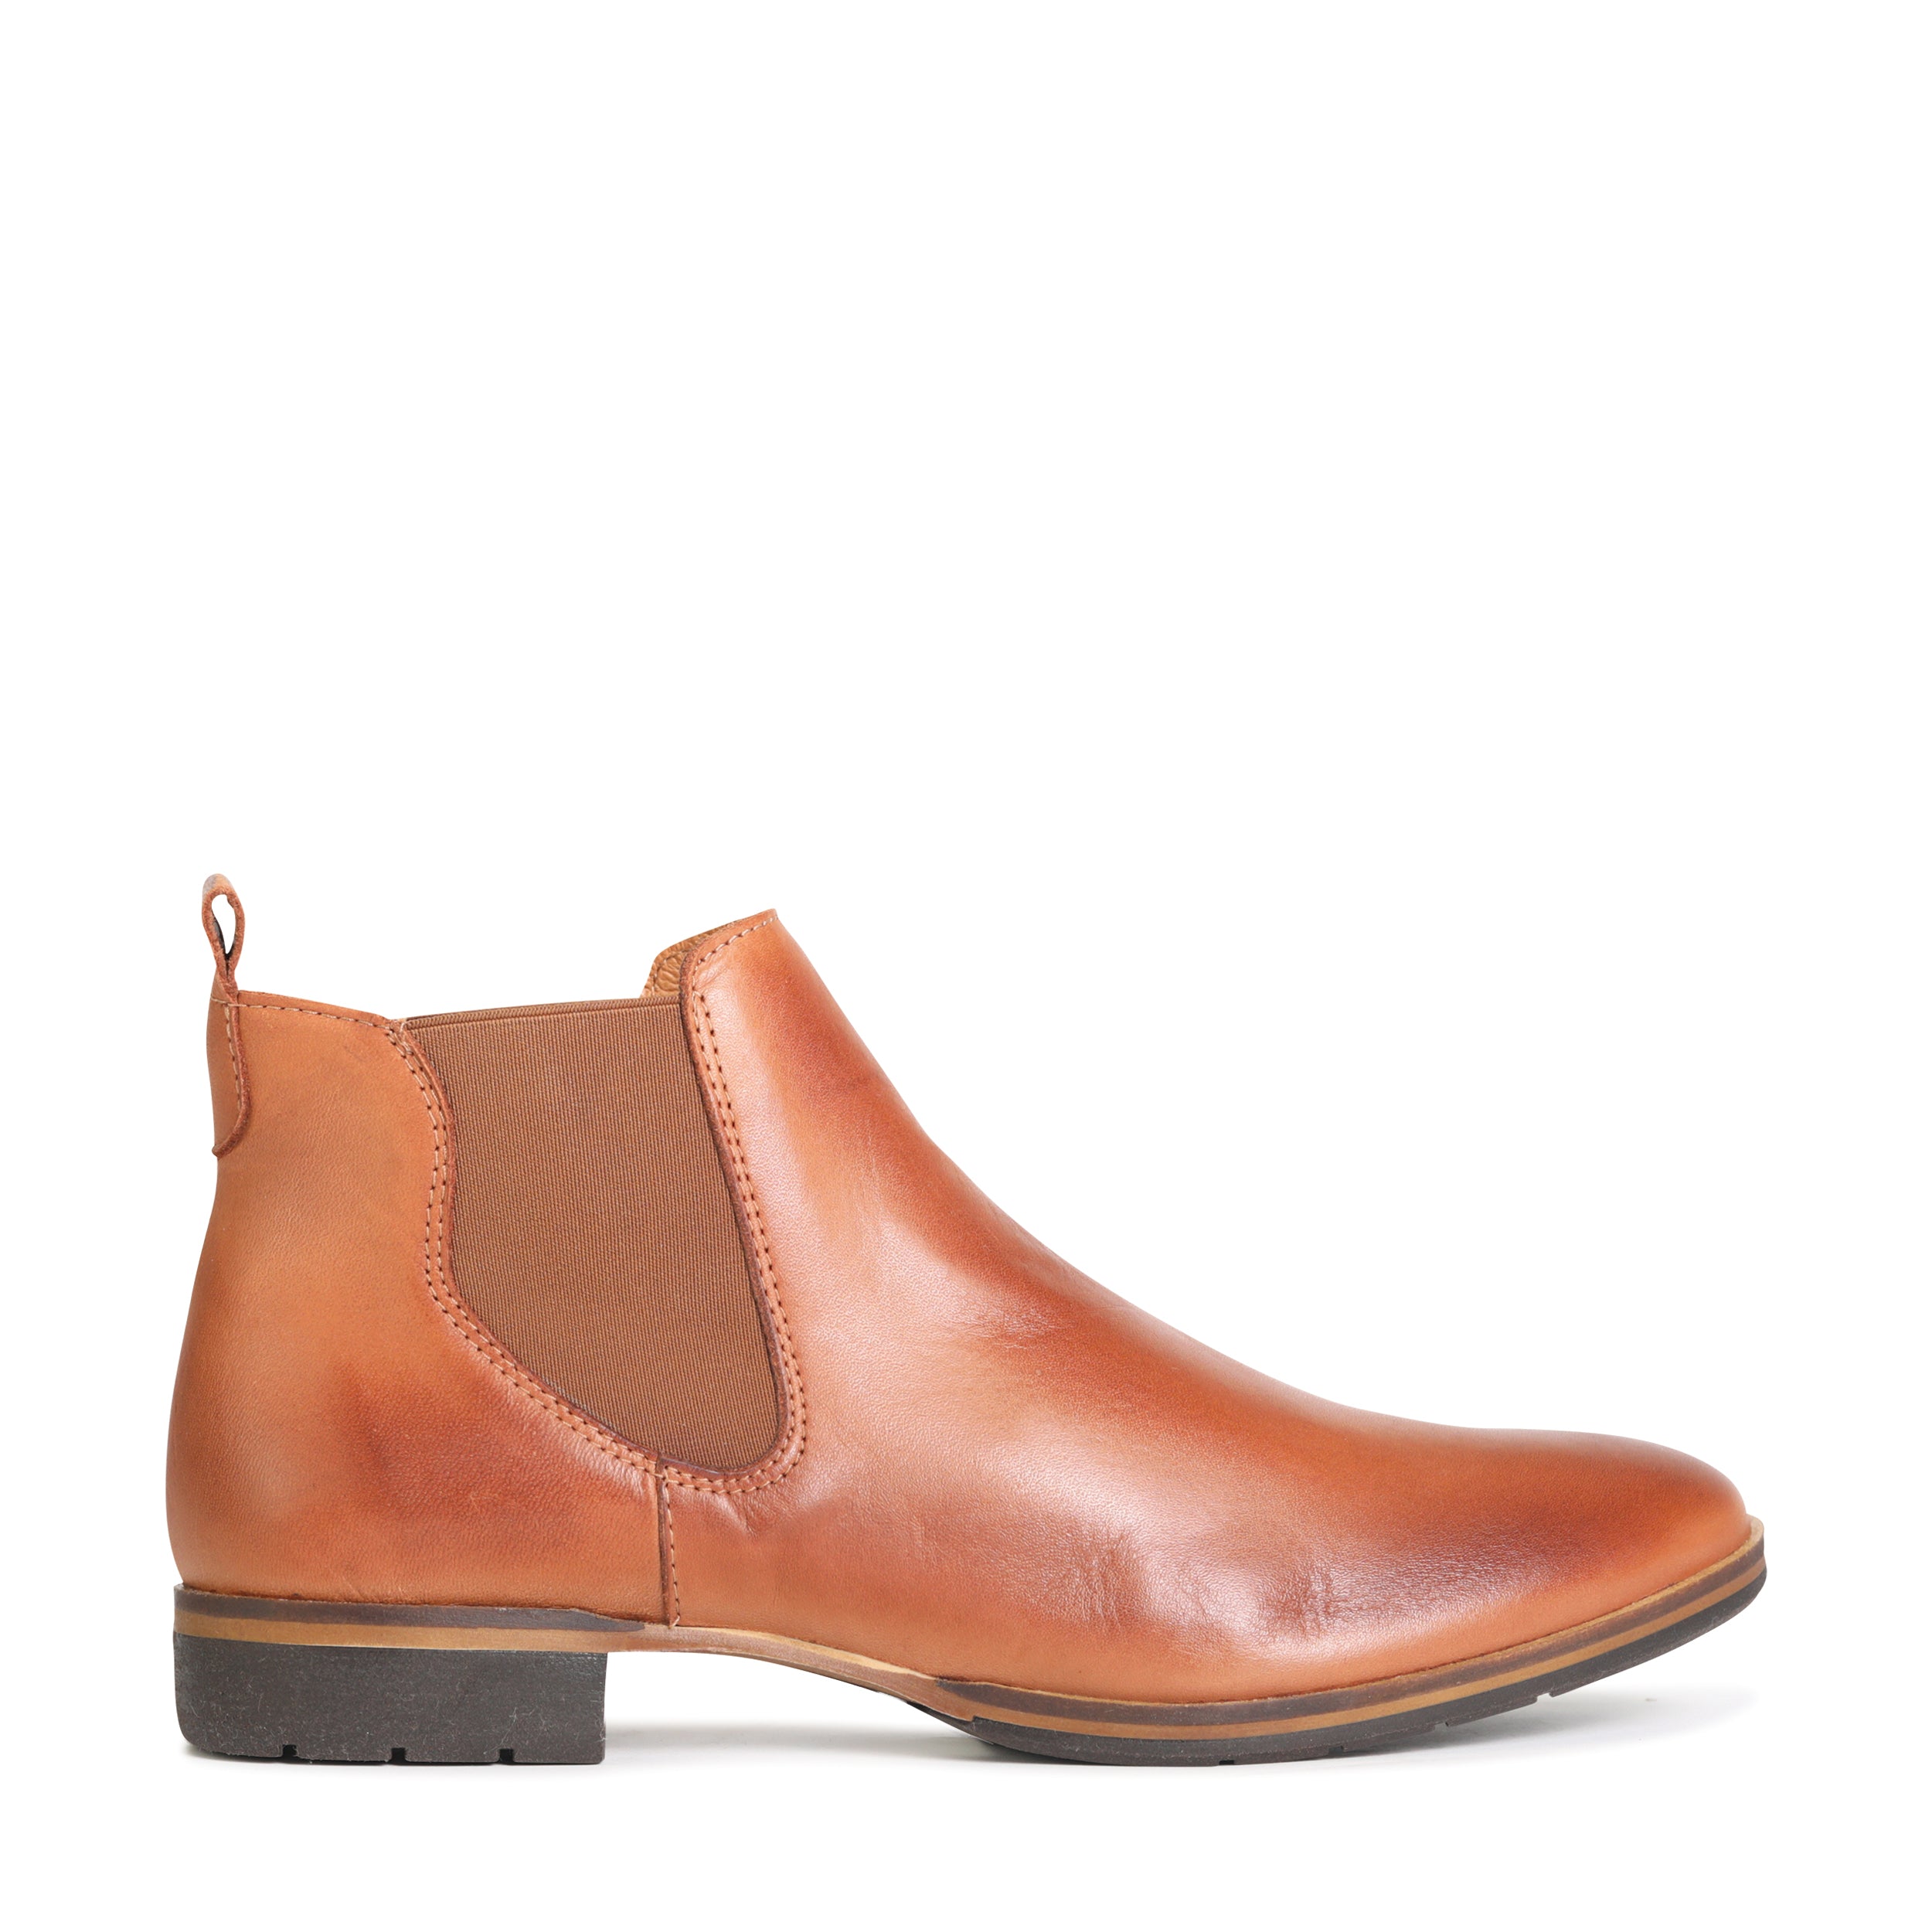 GALA - EOS Footwear - Ankle Boots #color_Brandy